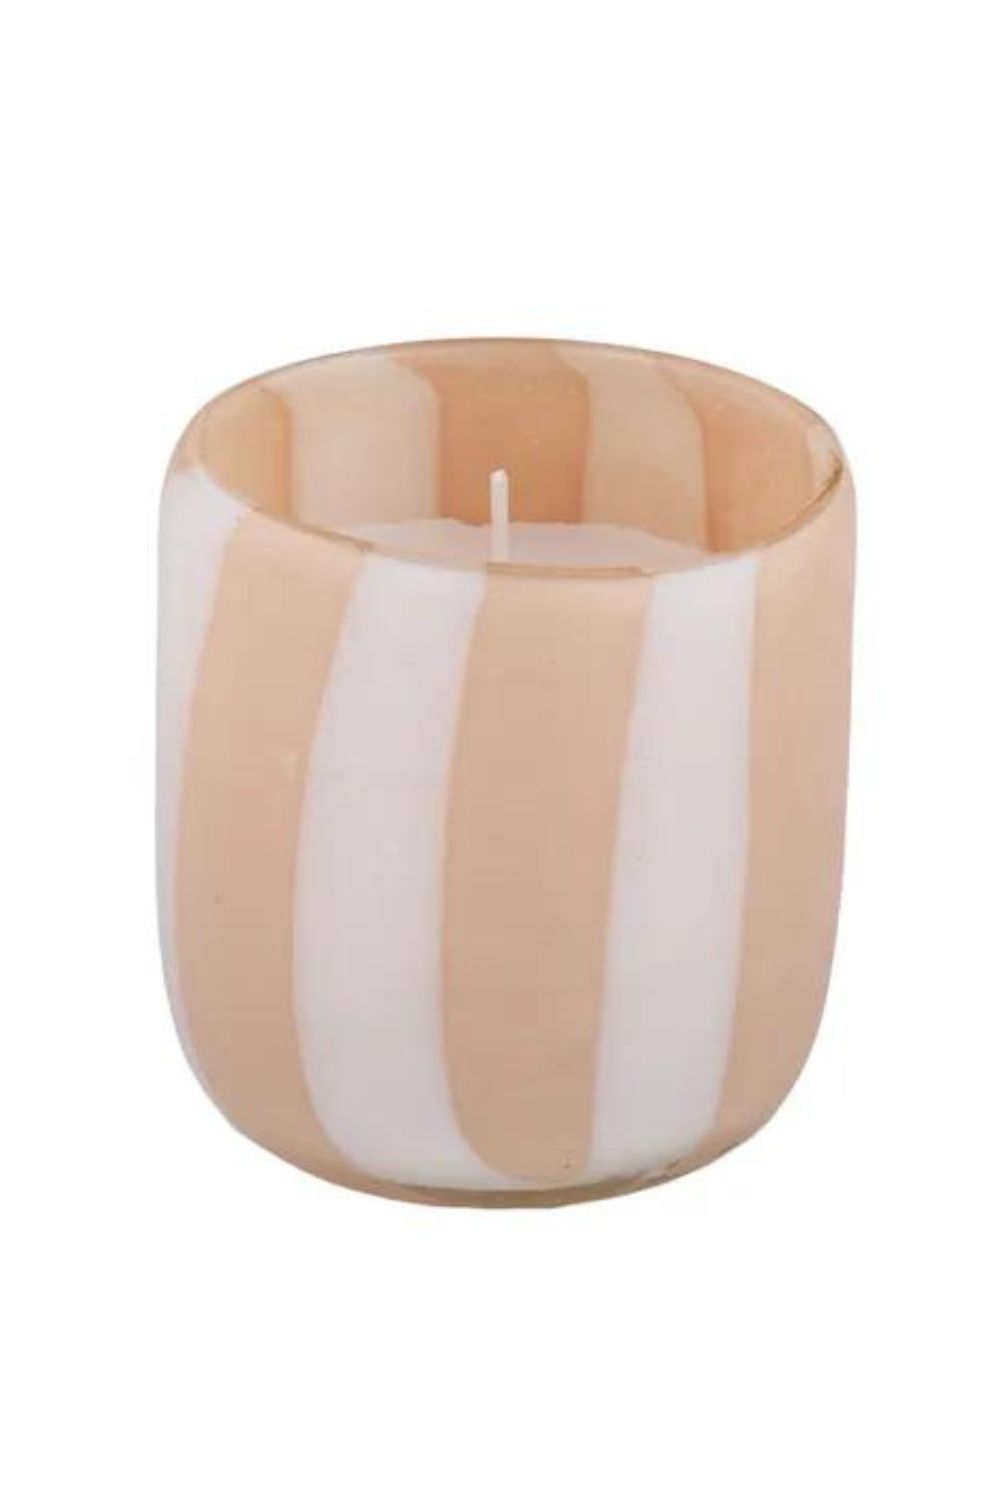 HAVEN GLASS CANDLE - White / Pink